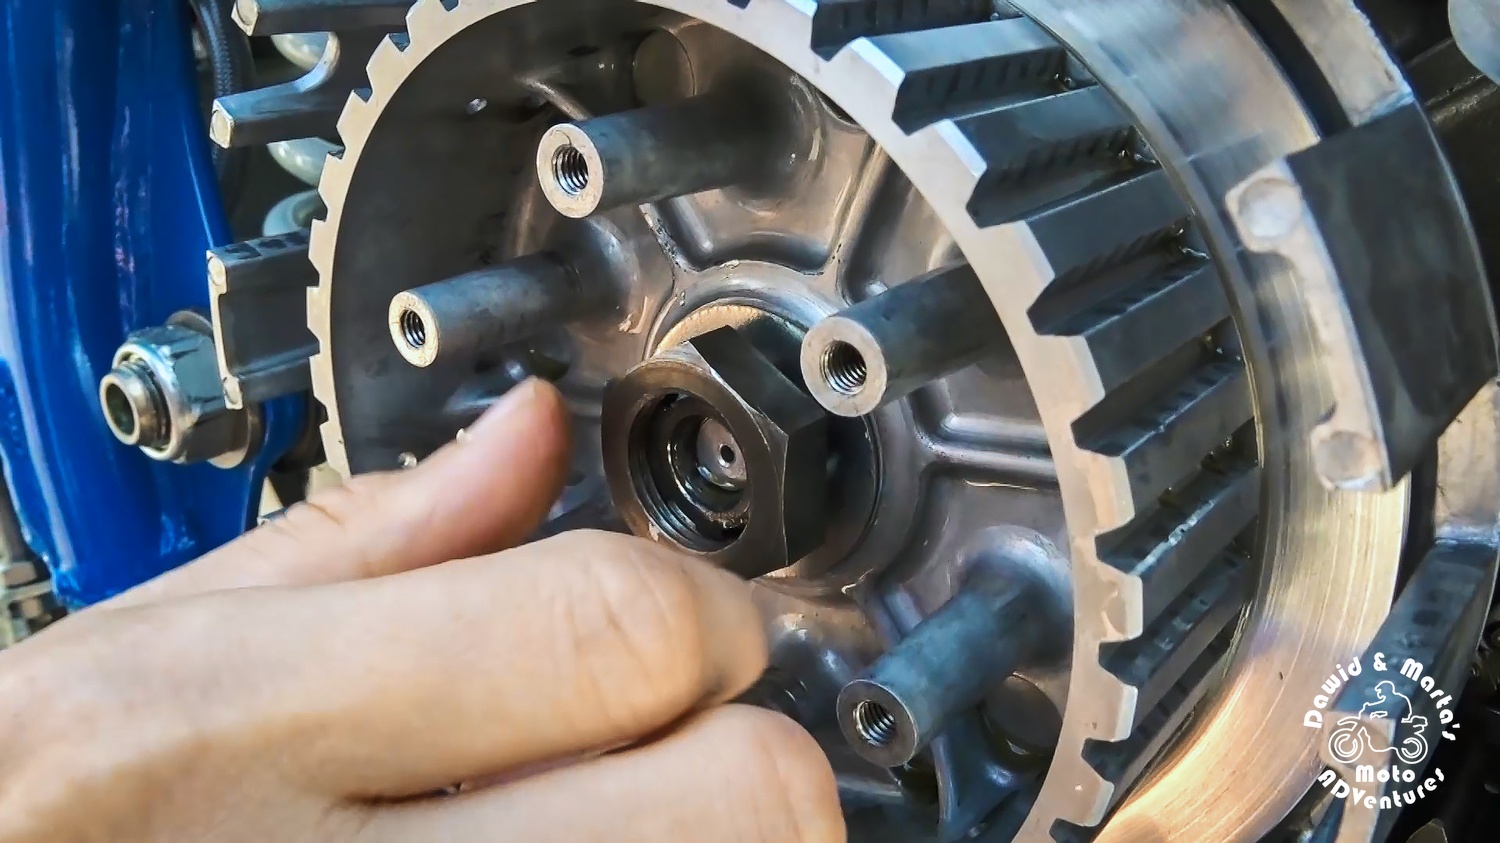 Clutch basket and its inner hub nut, locking them on the shaft